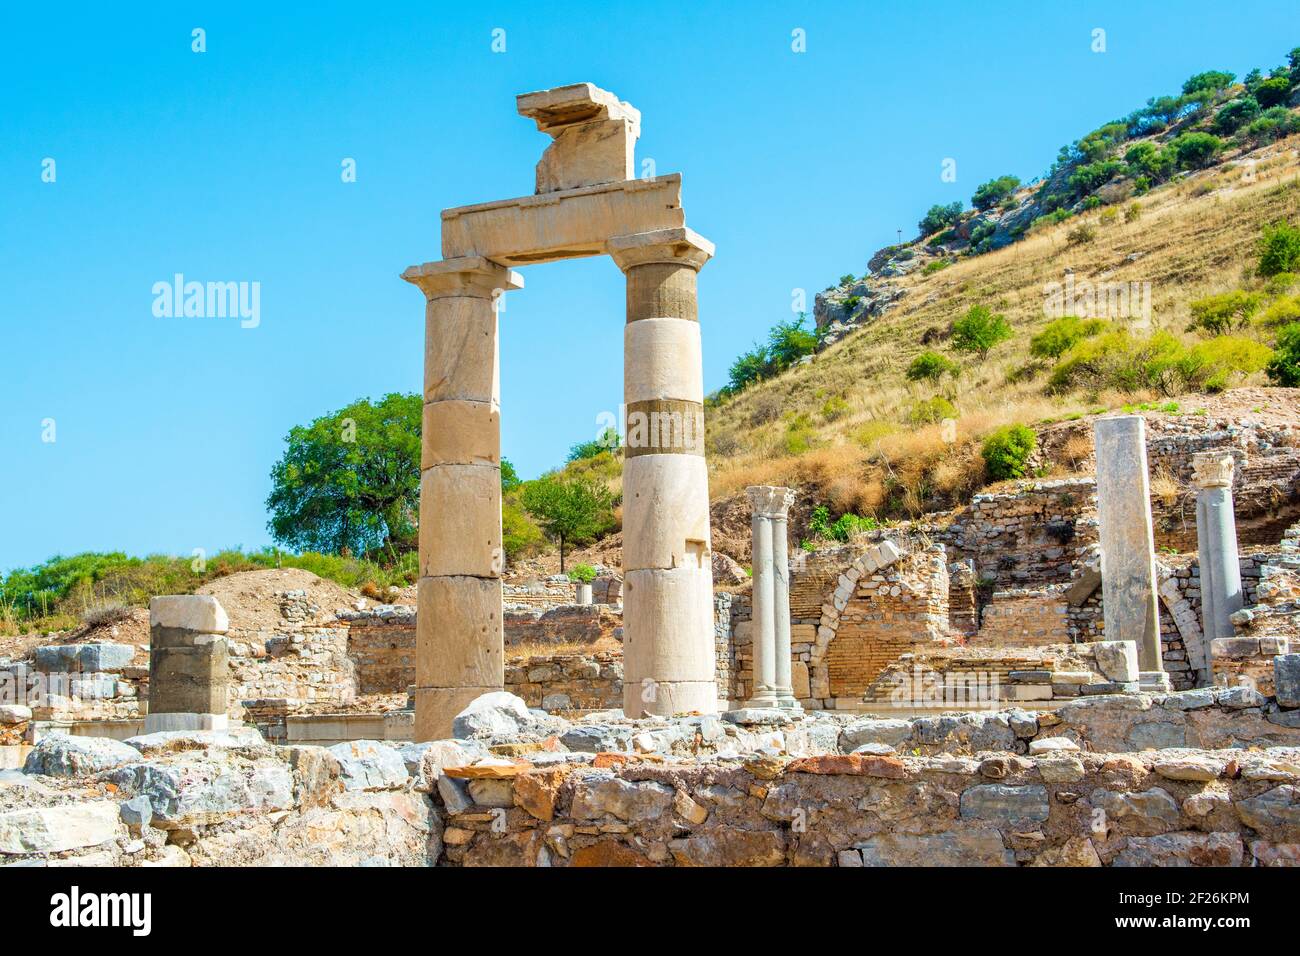 Ruins of Prytaneion in an ancient Greek city Ephesus, Turkey Stock Photo